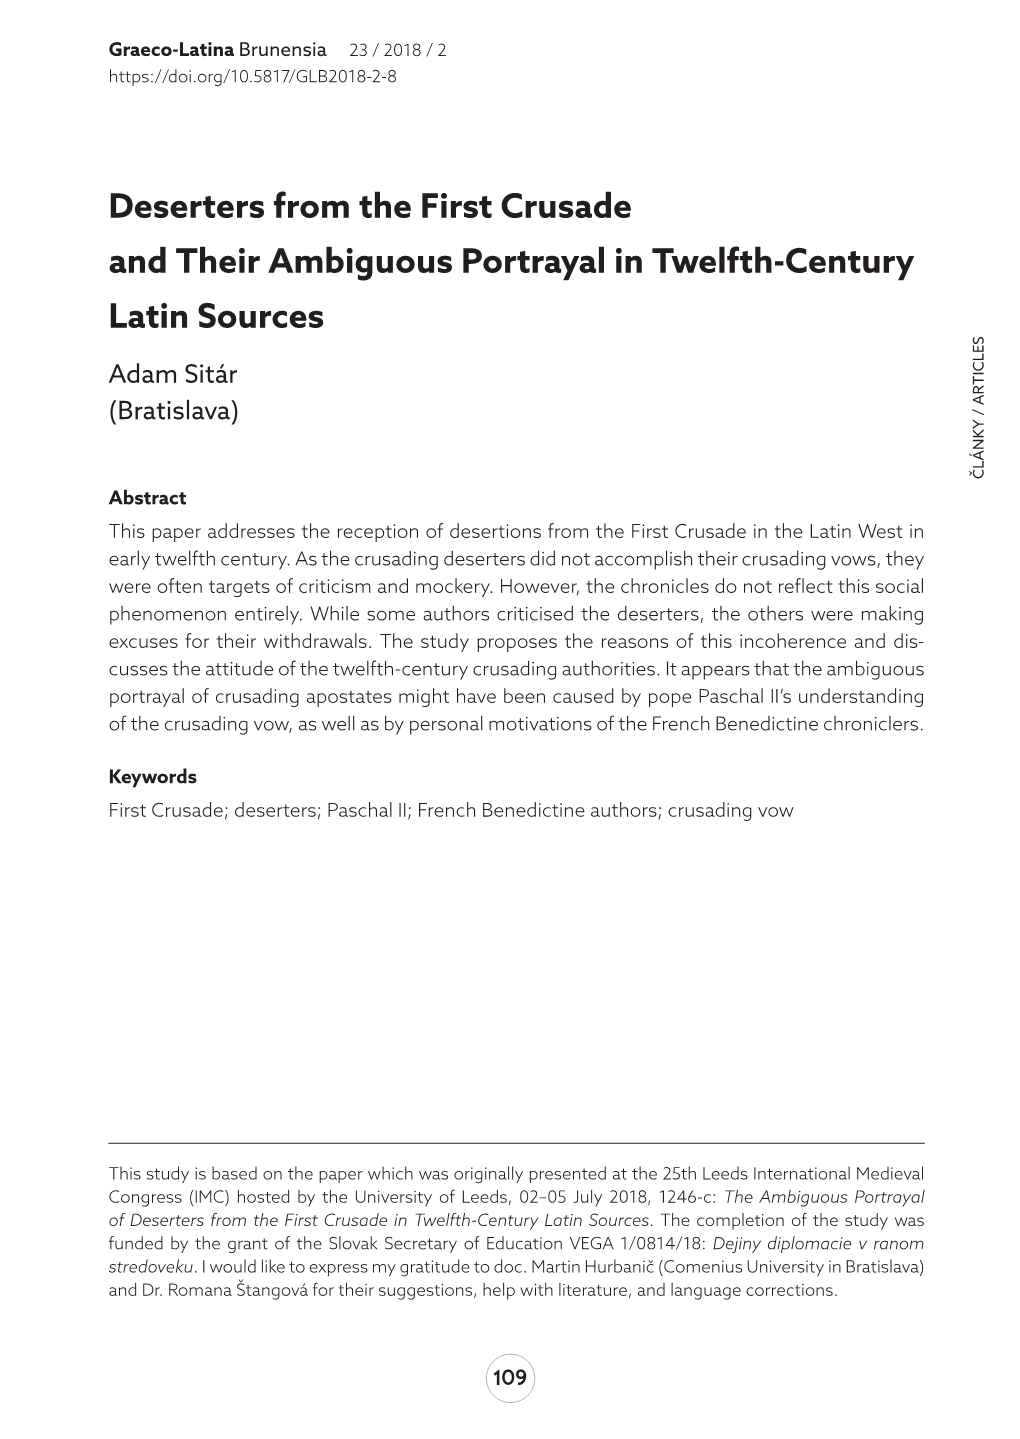 Deserters from the First Crusade and Their Ambiguous Portrayal in Twelfth-Century Latin Sources